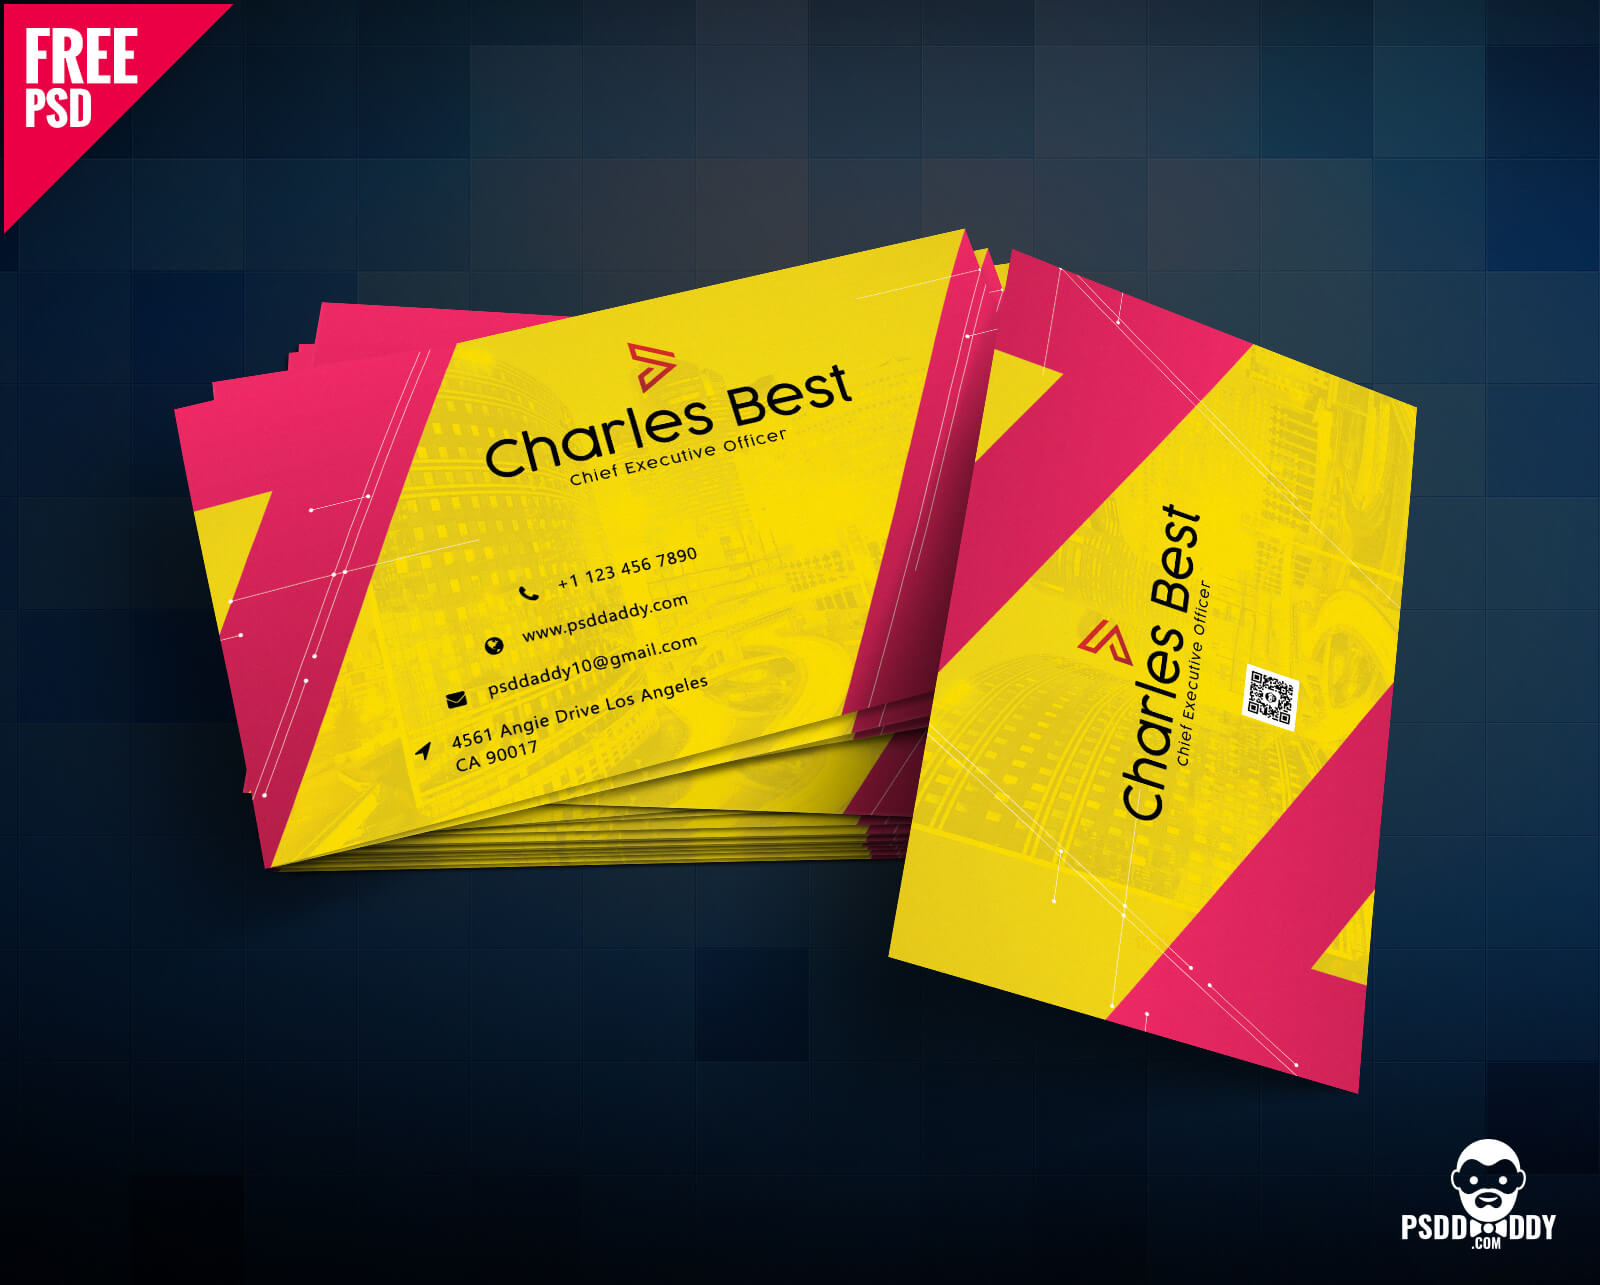 Download] Creative Business Card Free Psd | Psddaddy In Photoshop Cs6 Business Card Template